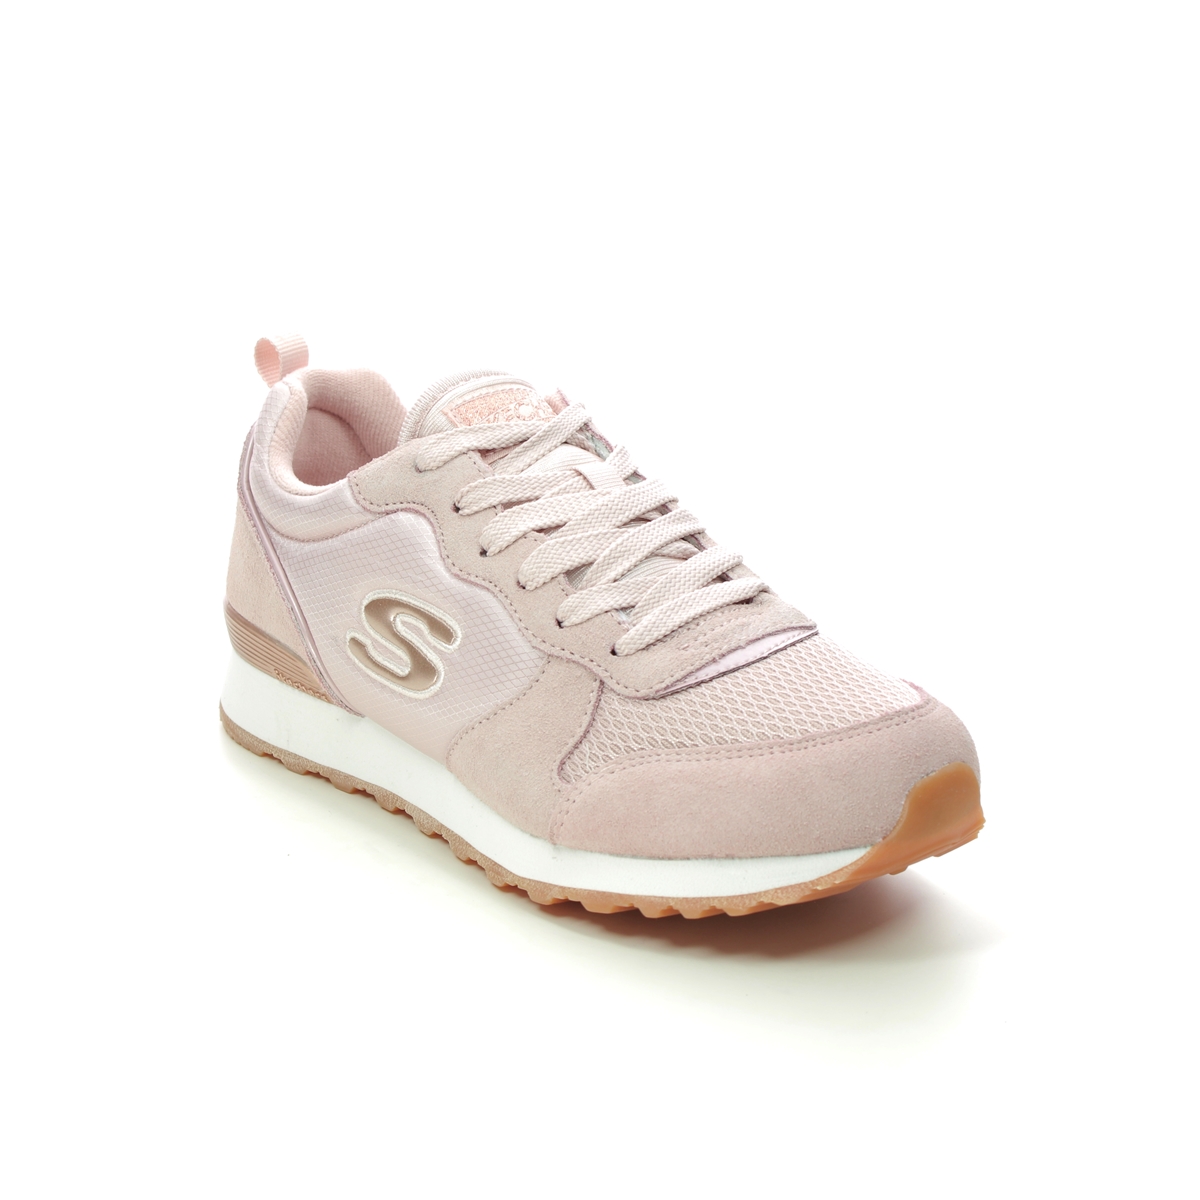 Skechers 85 Gold 111 BLSH Pink trainers